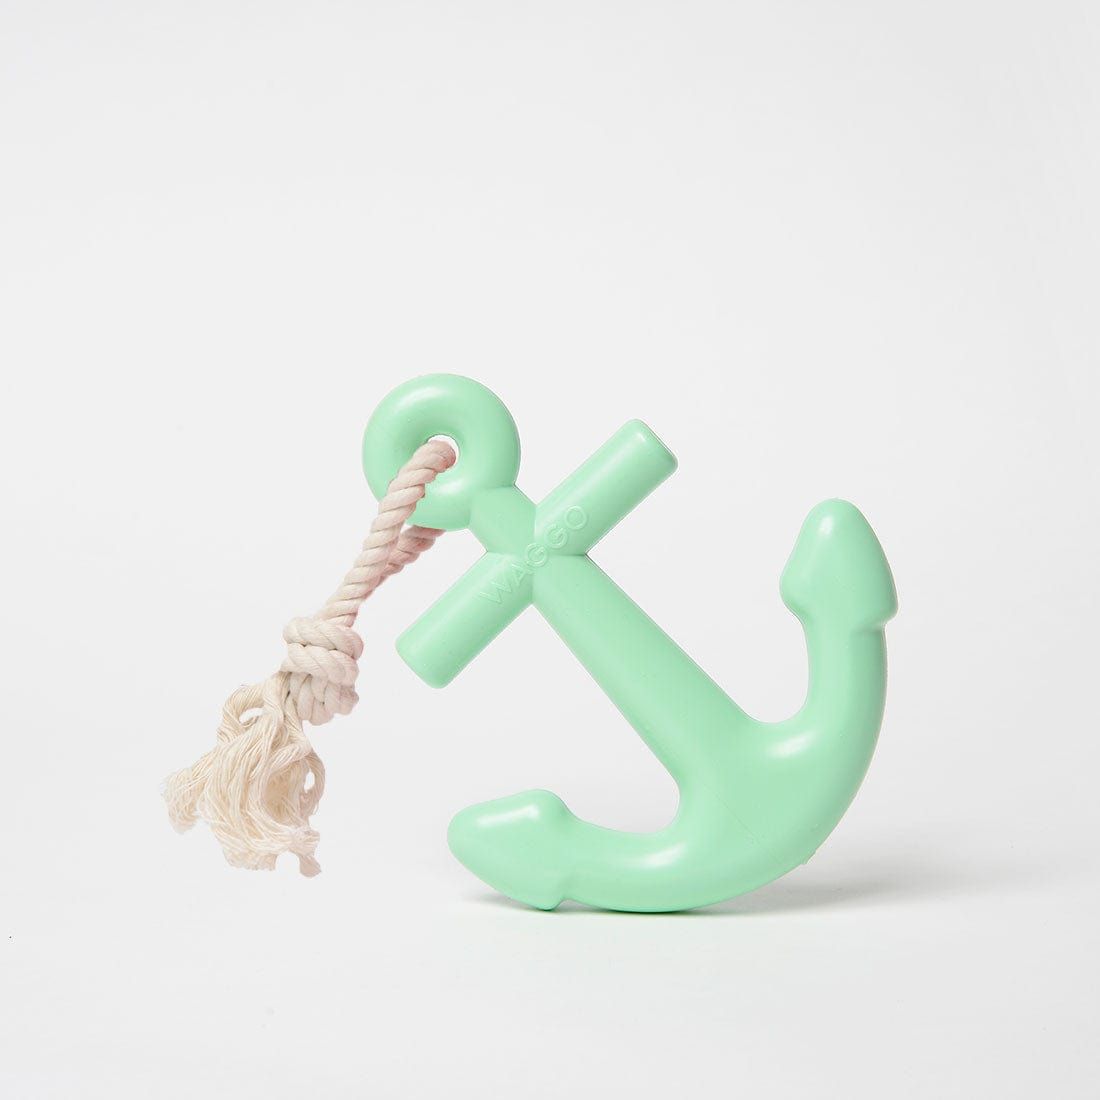 Waggo Mint Anchor / Large Anchors Aweigh Rubber Dog Toy by Waggo